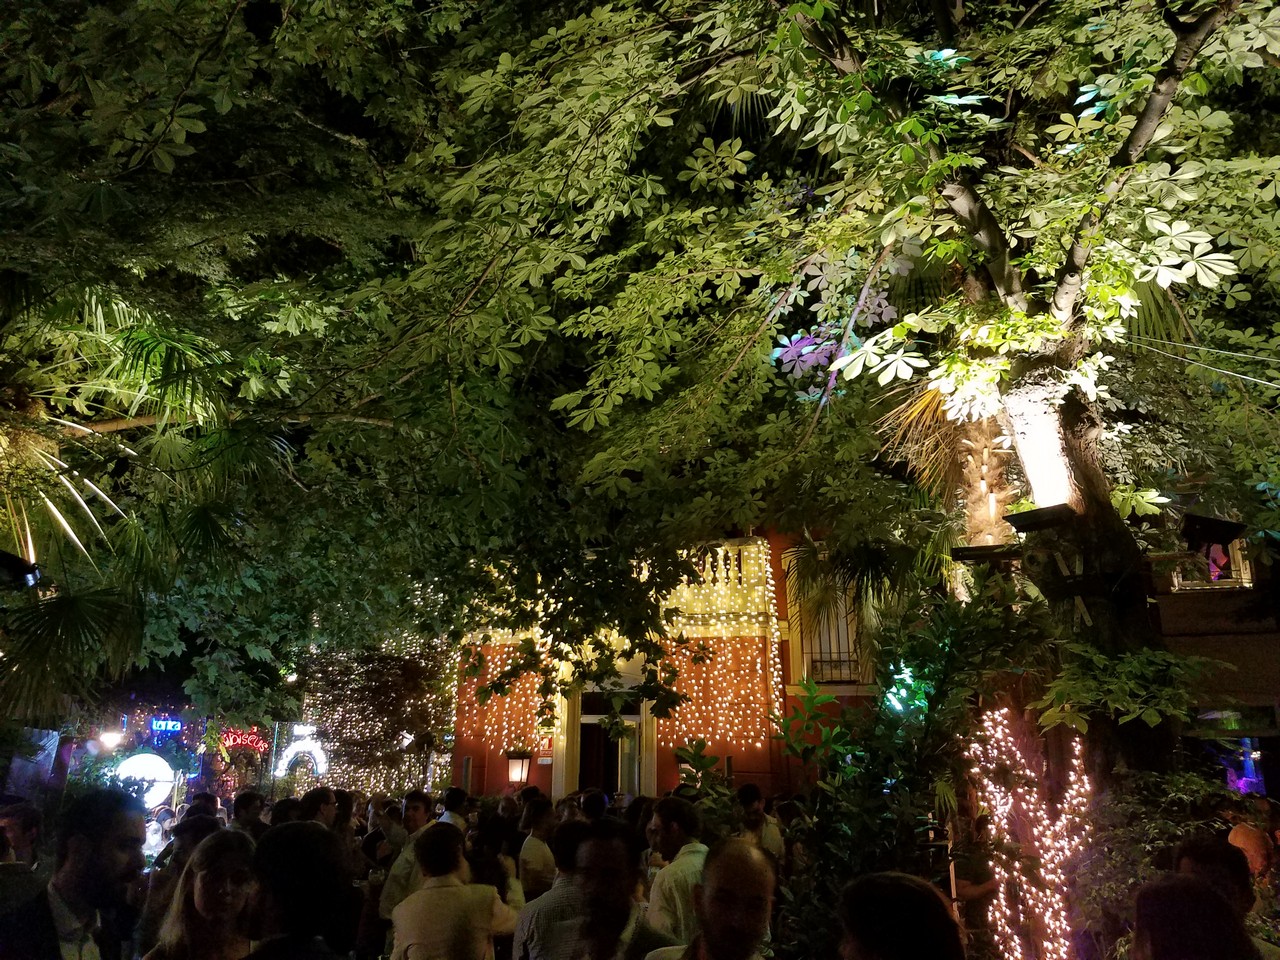 a group of people in a street with trees and lights